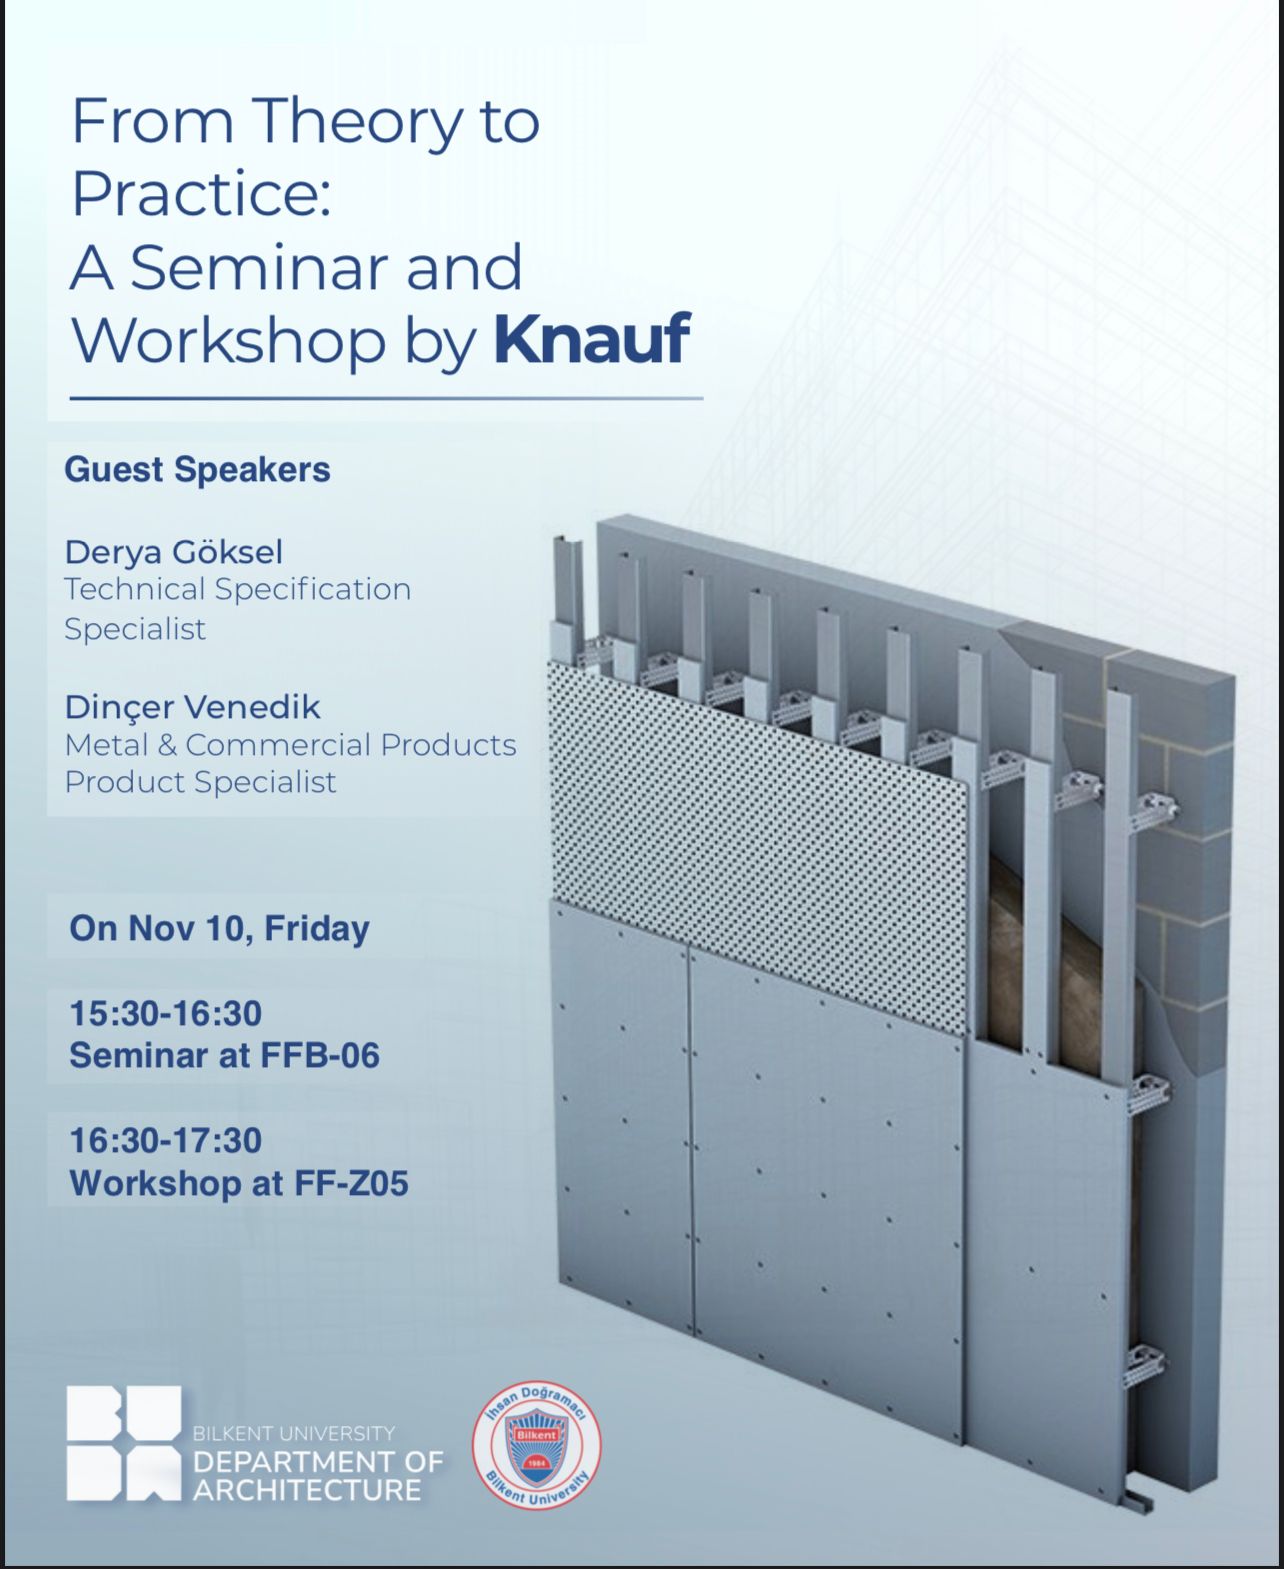 From Theory to Practice: A Seminar and Workshop by Knauf